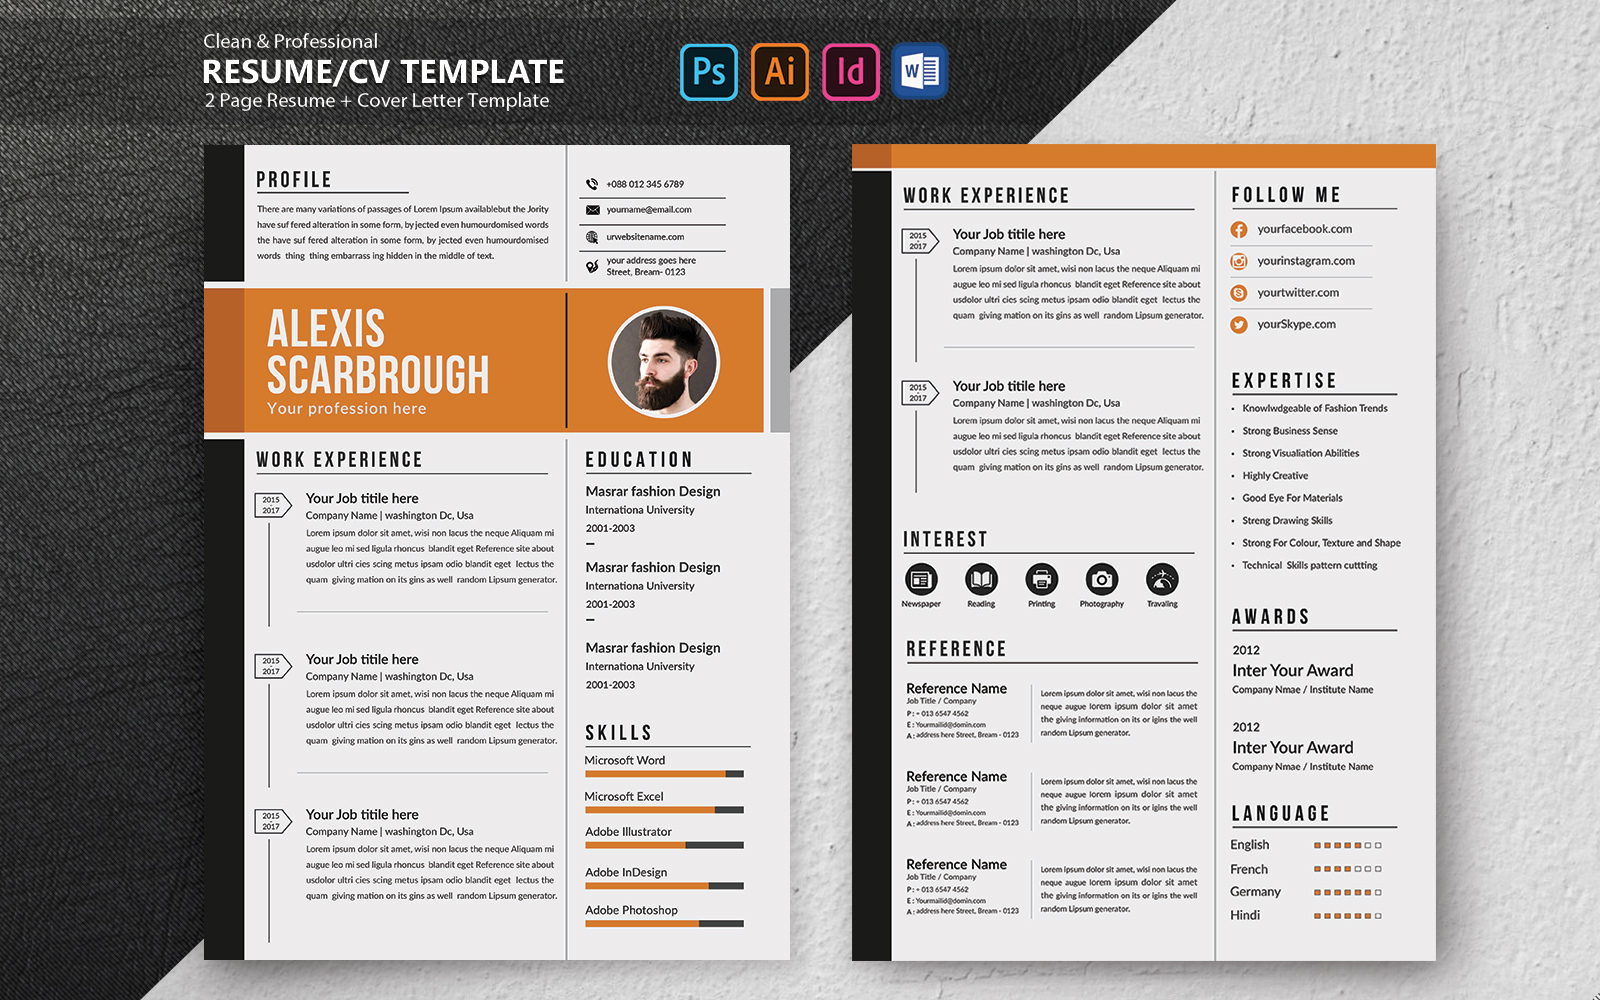 Alexis Scarbrough Professional Resume Template